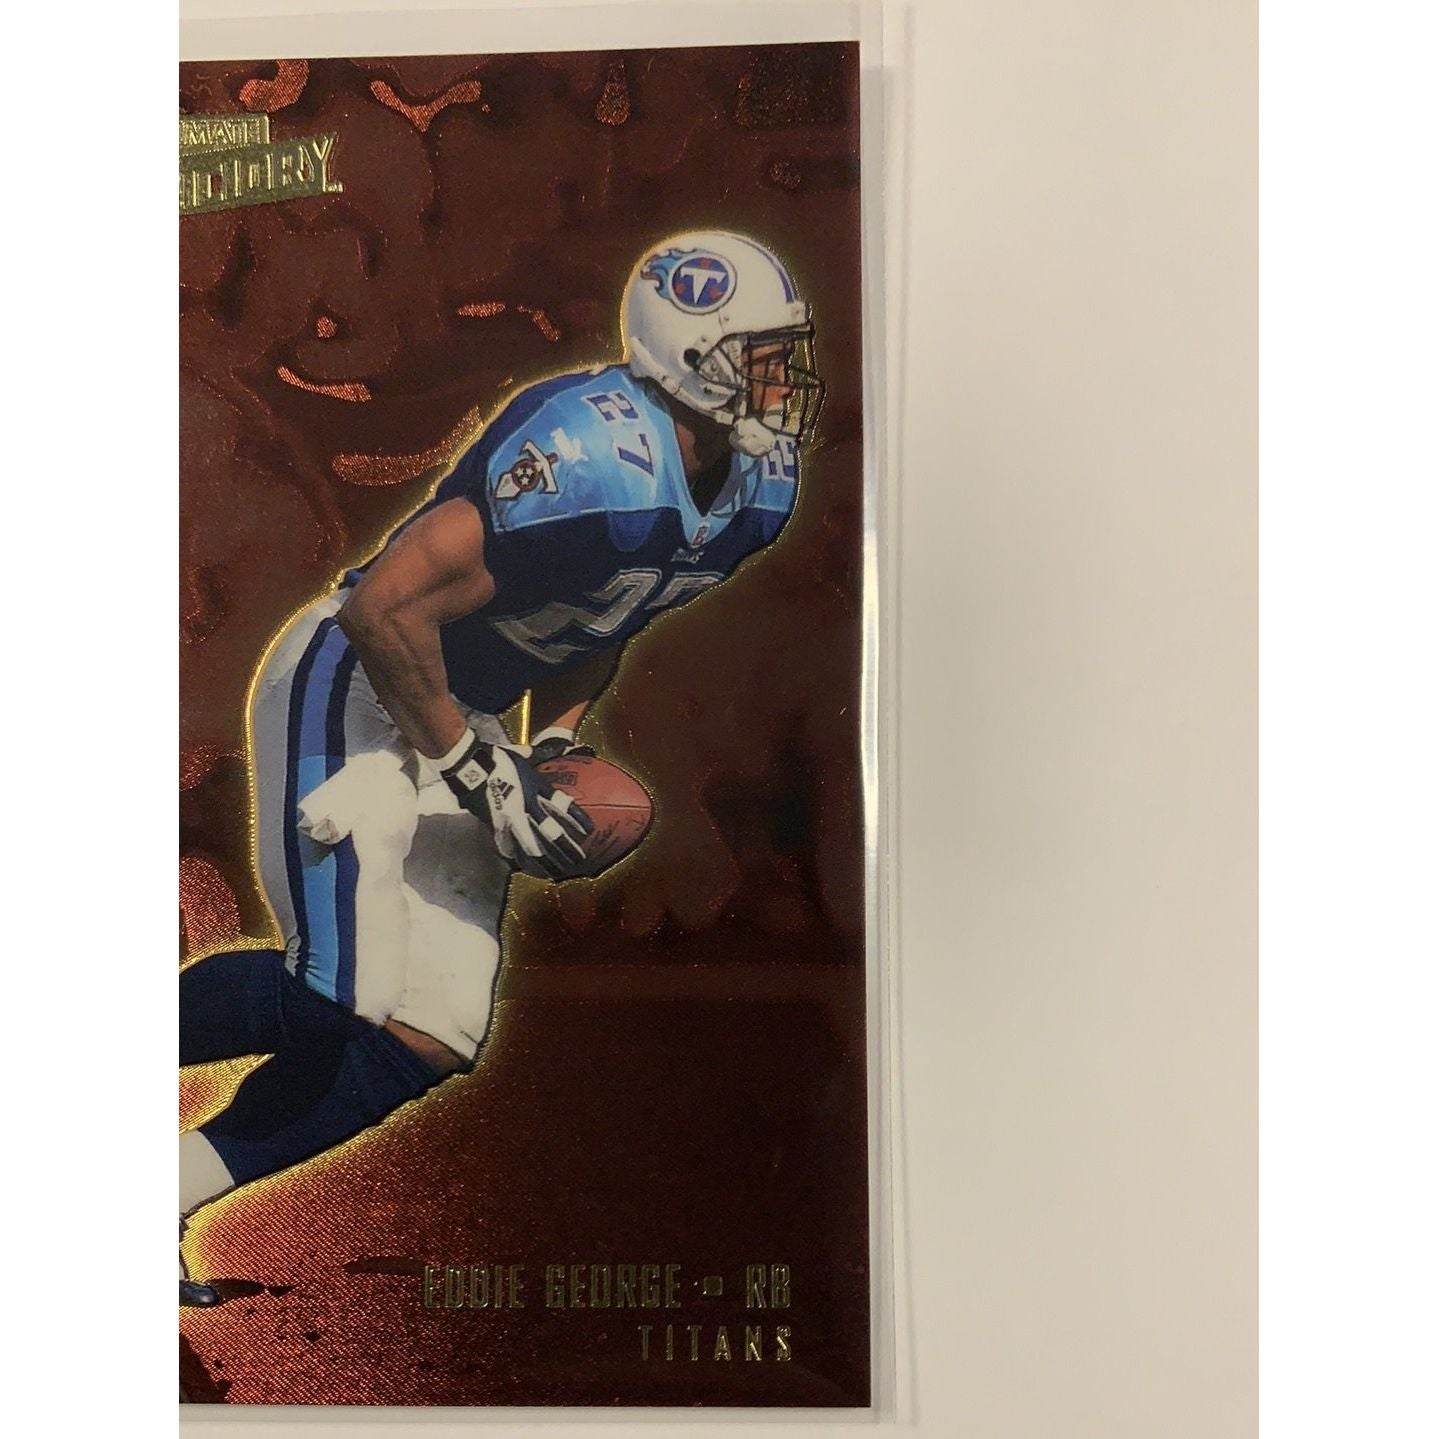  2000 Upper Deck Ultimate Victory Eddie George Battle Ground  Local Legends Cards & Collectibles